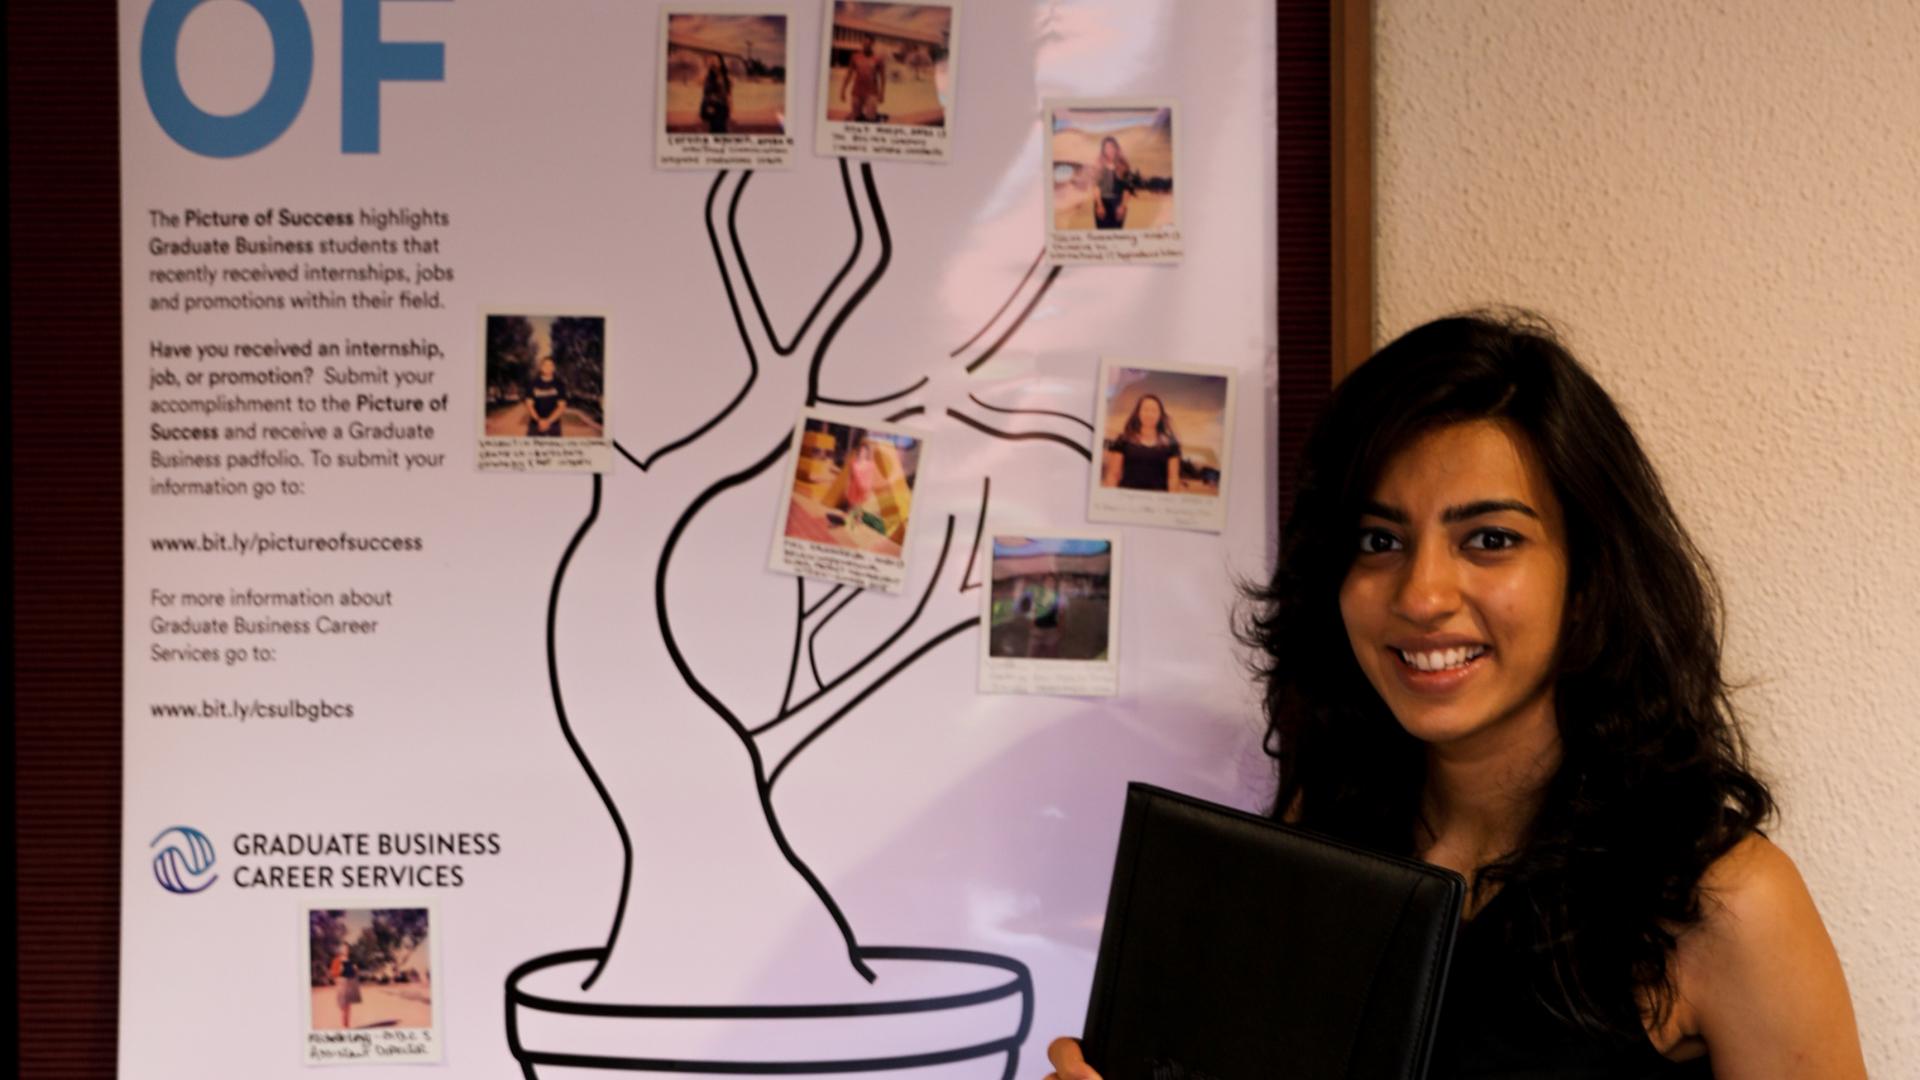 Vandana Vaswani in front of the Picture of Success Poster